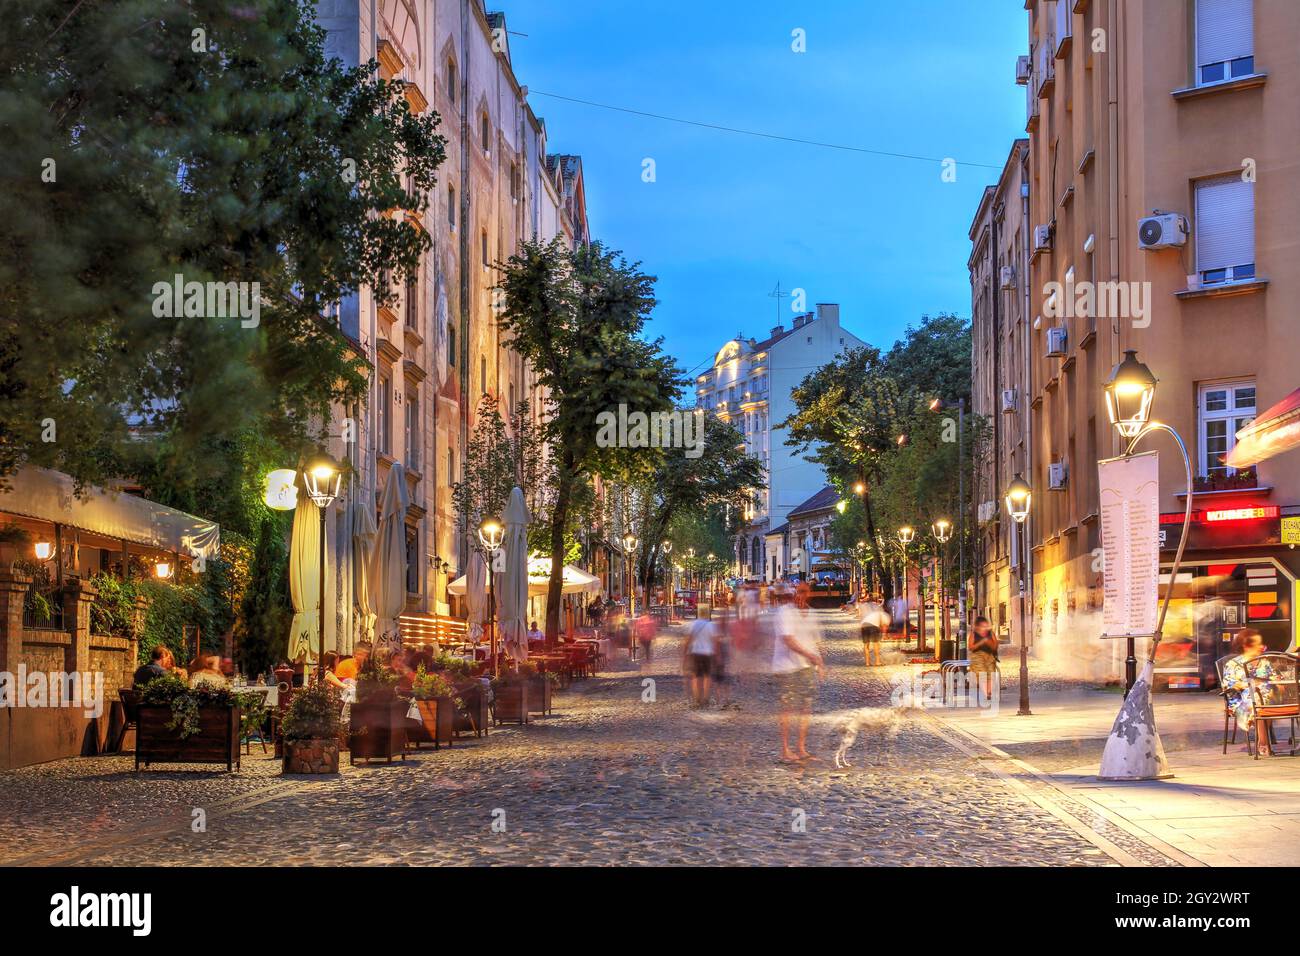 One of the most popular street in Belgrade, Serbia, Skadarlija is also known as the Bohemian quarter of the capital city. Stock Photo